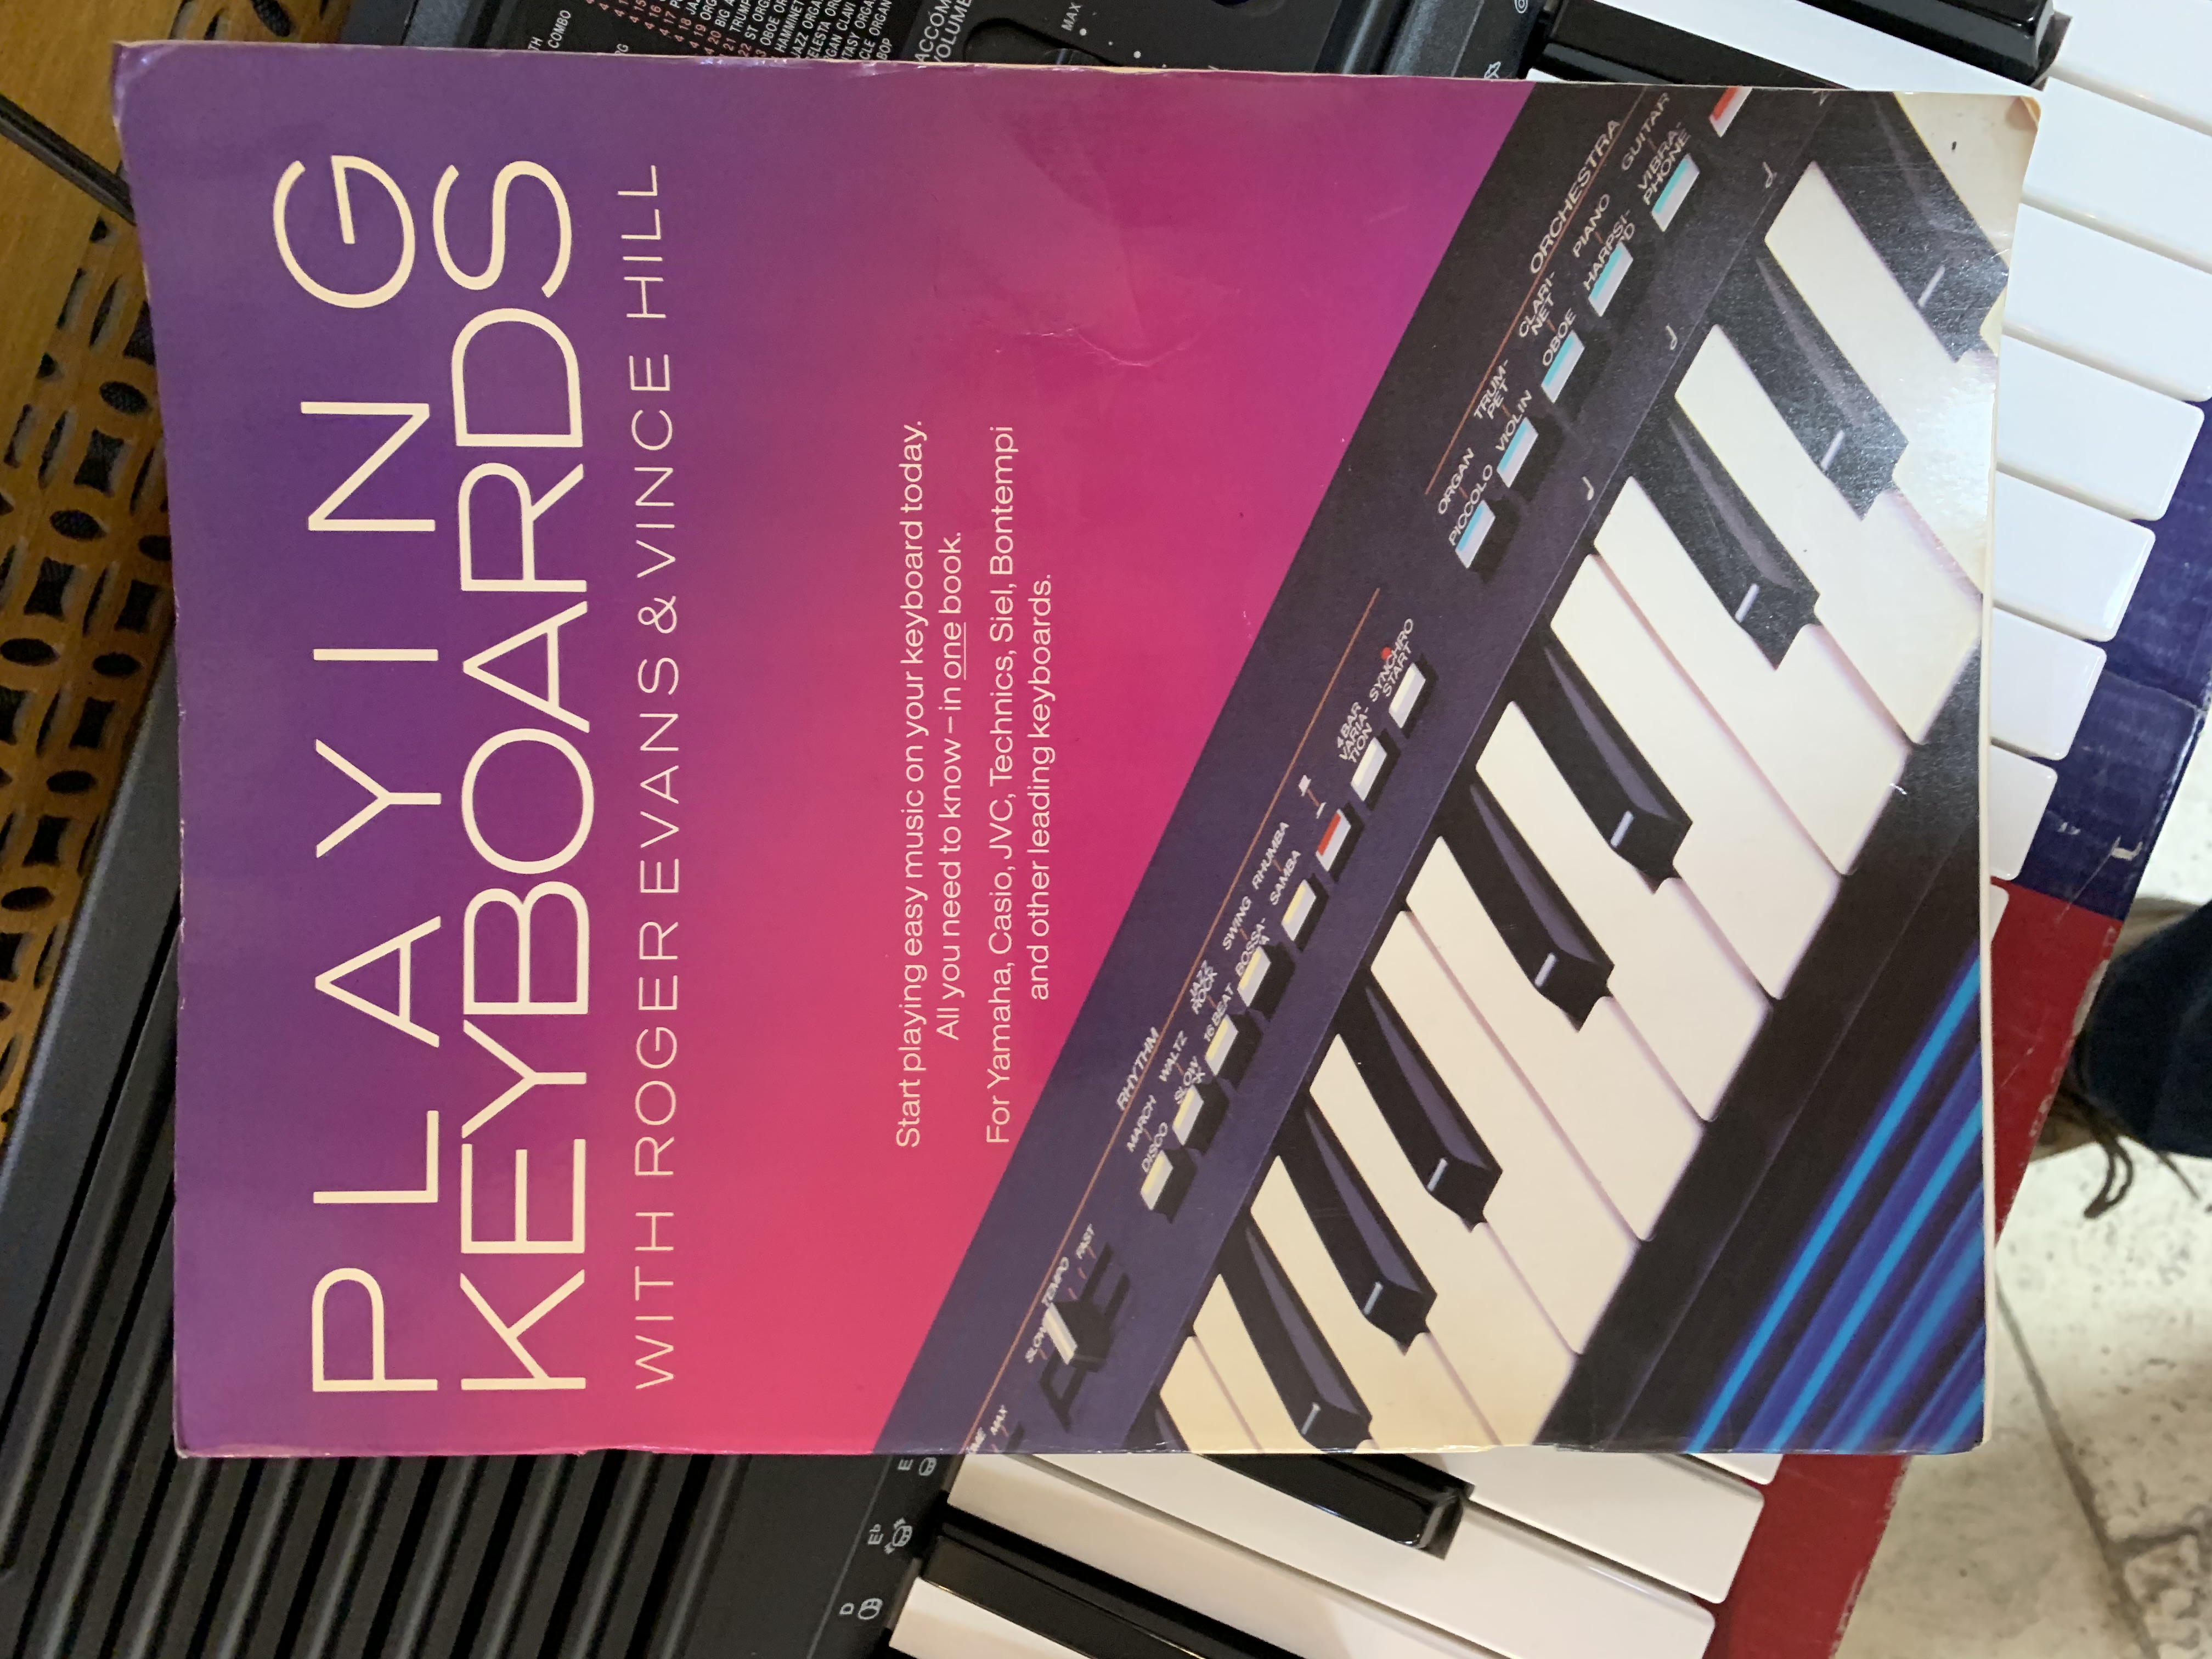 A picture of Playing Keyboards by Roger Evans and Vince Hill